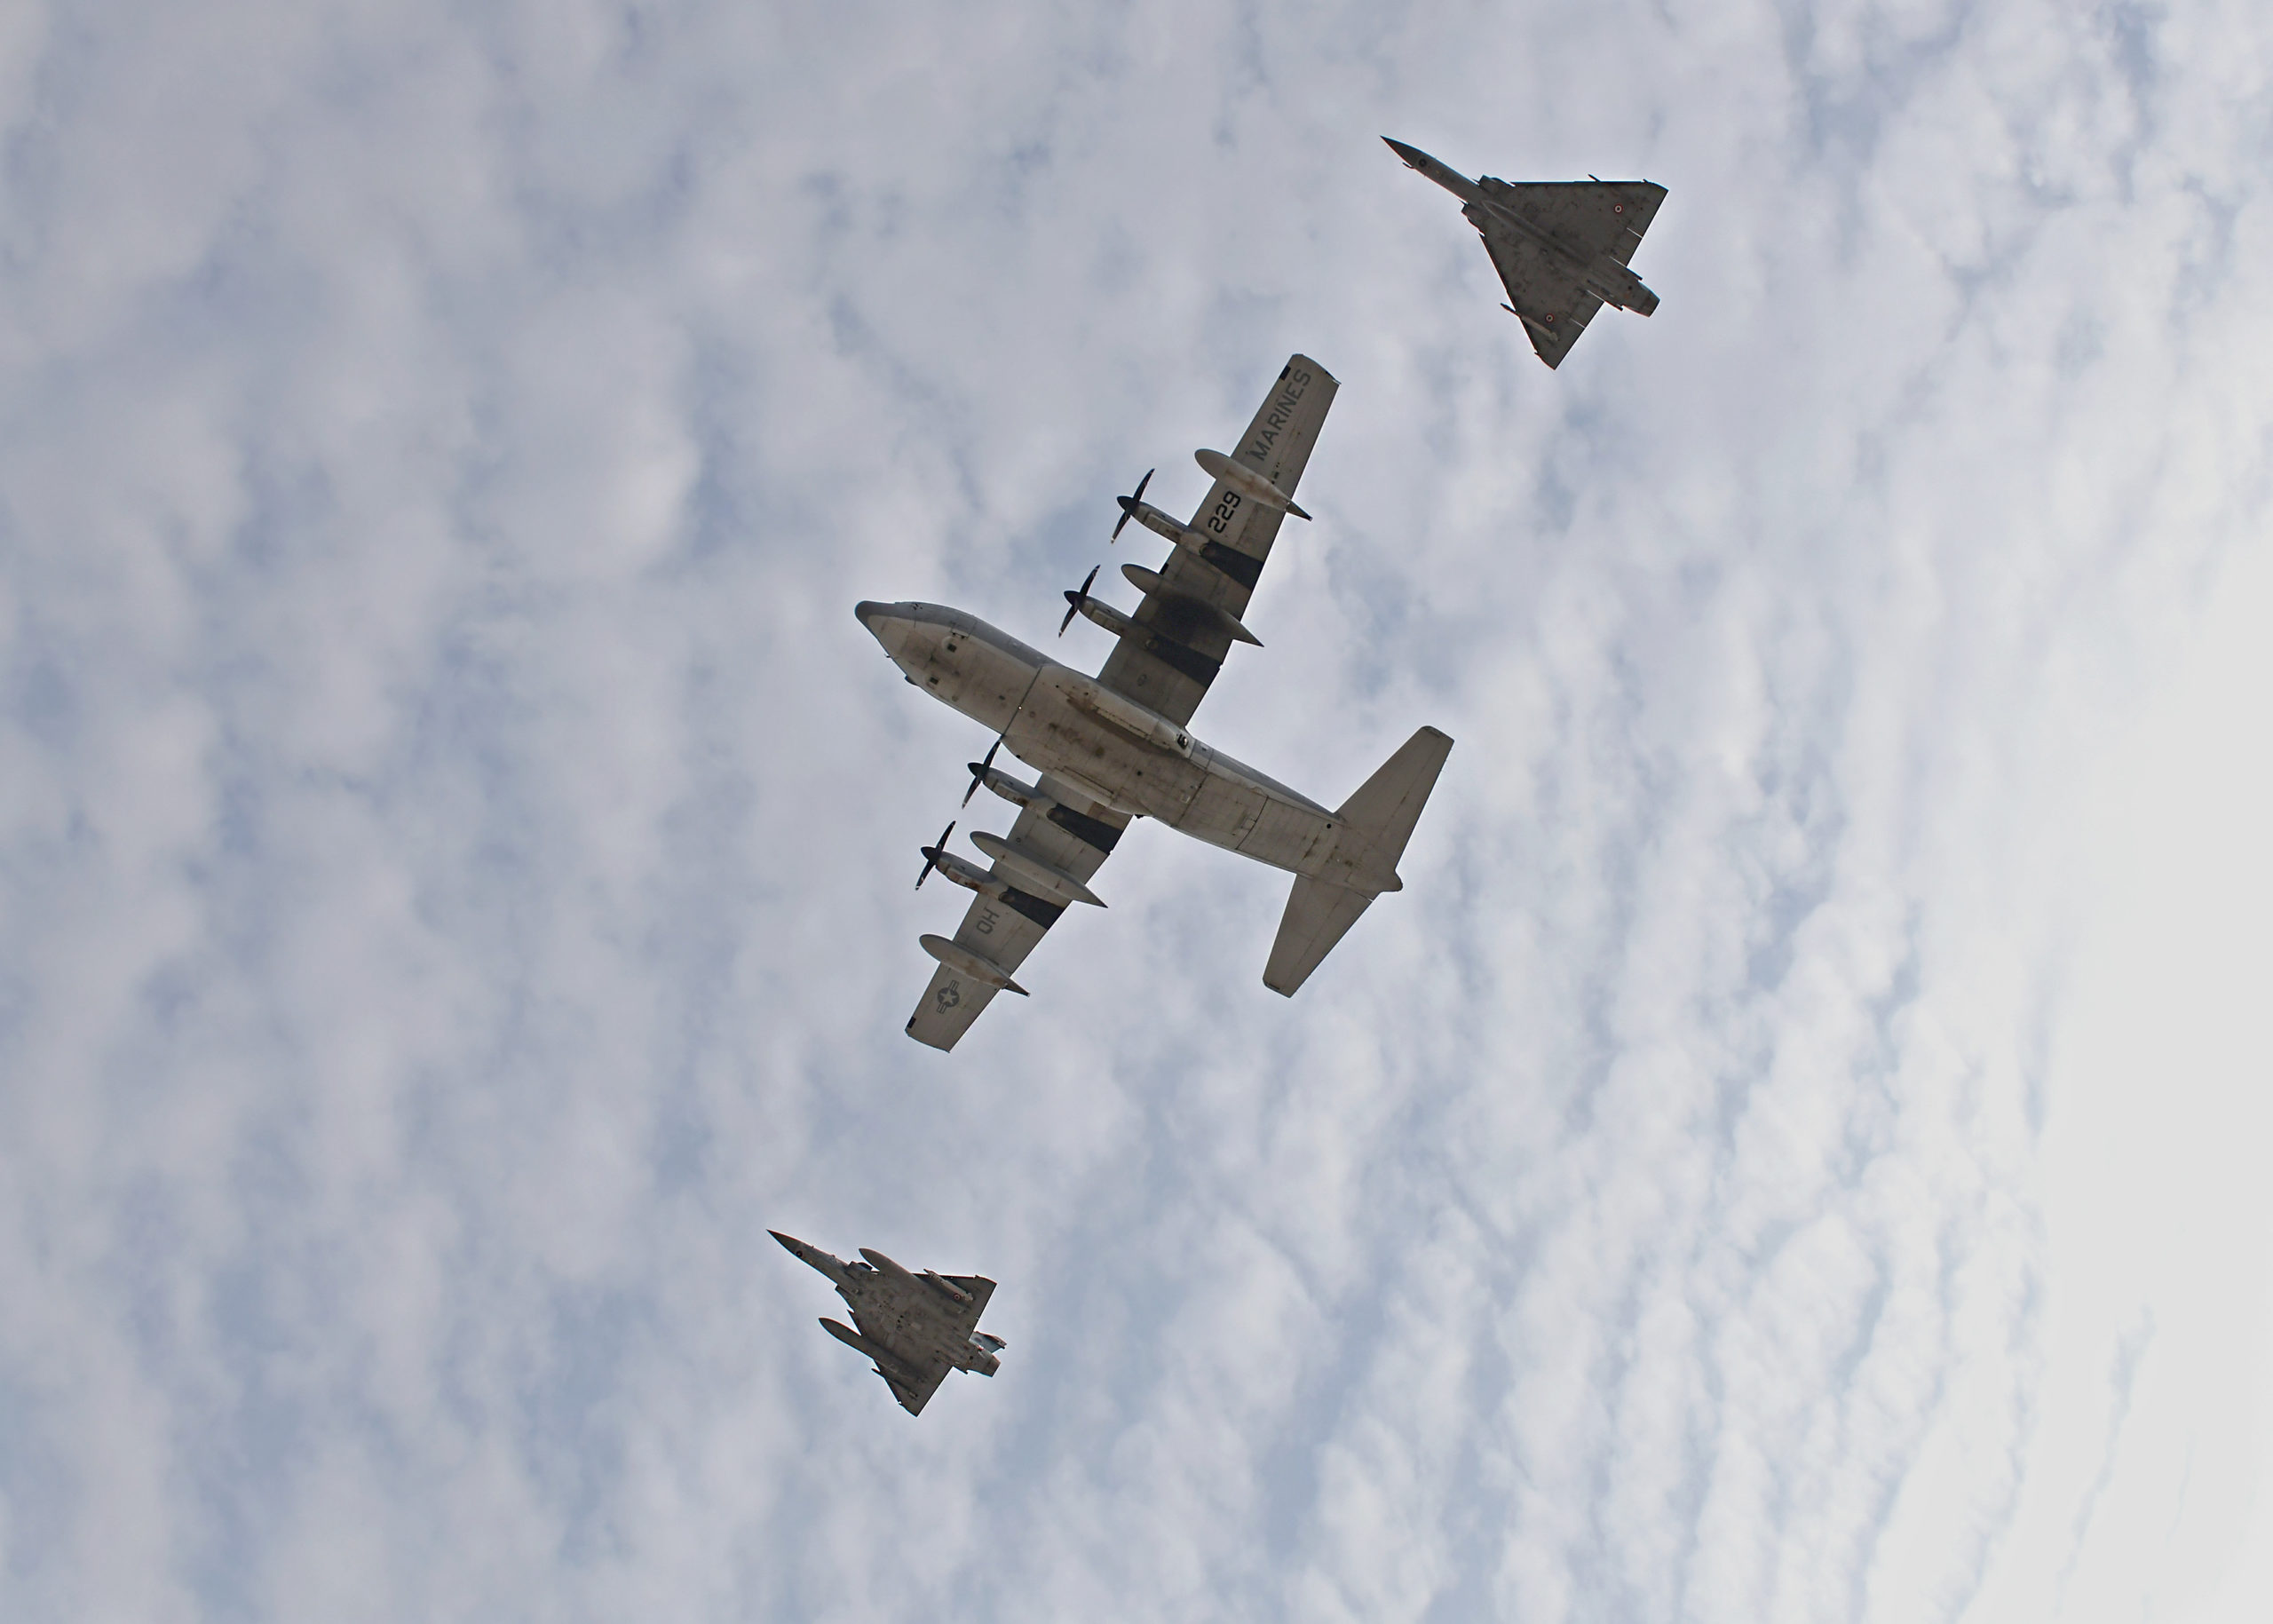 A U.S. KC-130J Super Hercules, with Combined Joint Task Force - Horn of Africa, and two French Dassault Mirage 2000’s perform a combined flyover with during a Patriot’s Day ceremony at Camp Lemonnier, Djibouti, Sept. 11, 2021, commemorating the 20th anniversary of the terrorist attacks on the United States on Sept. 11, 2001 © U.S. Army photo by Spc. Dereck White 6)